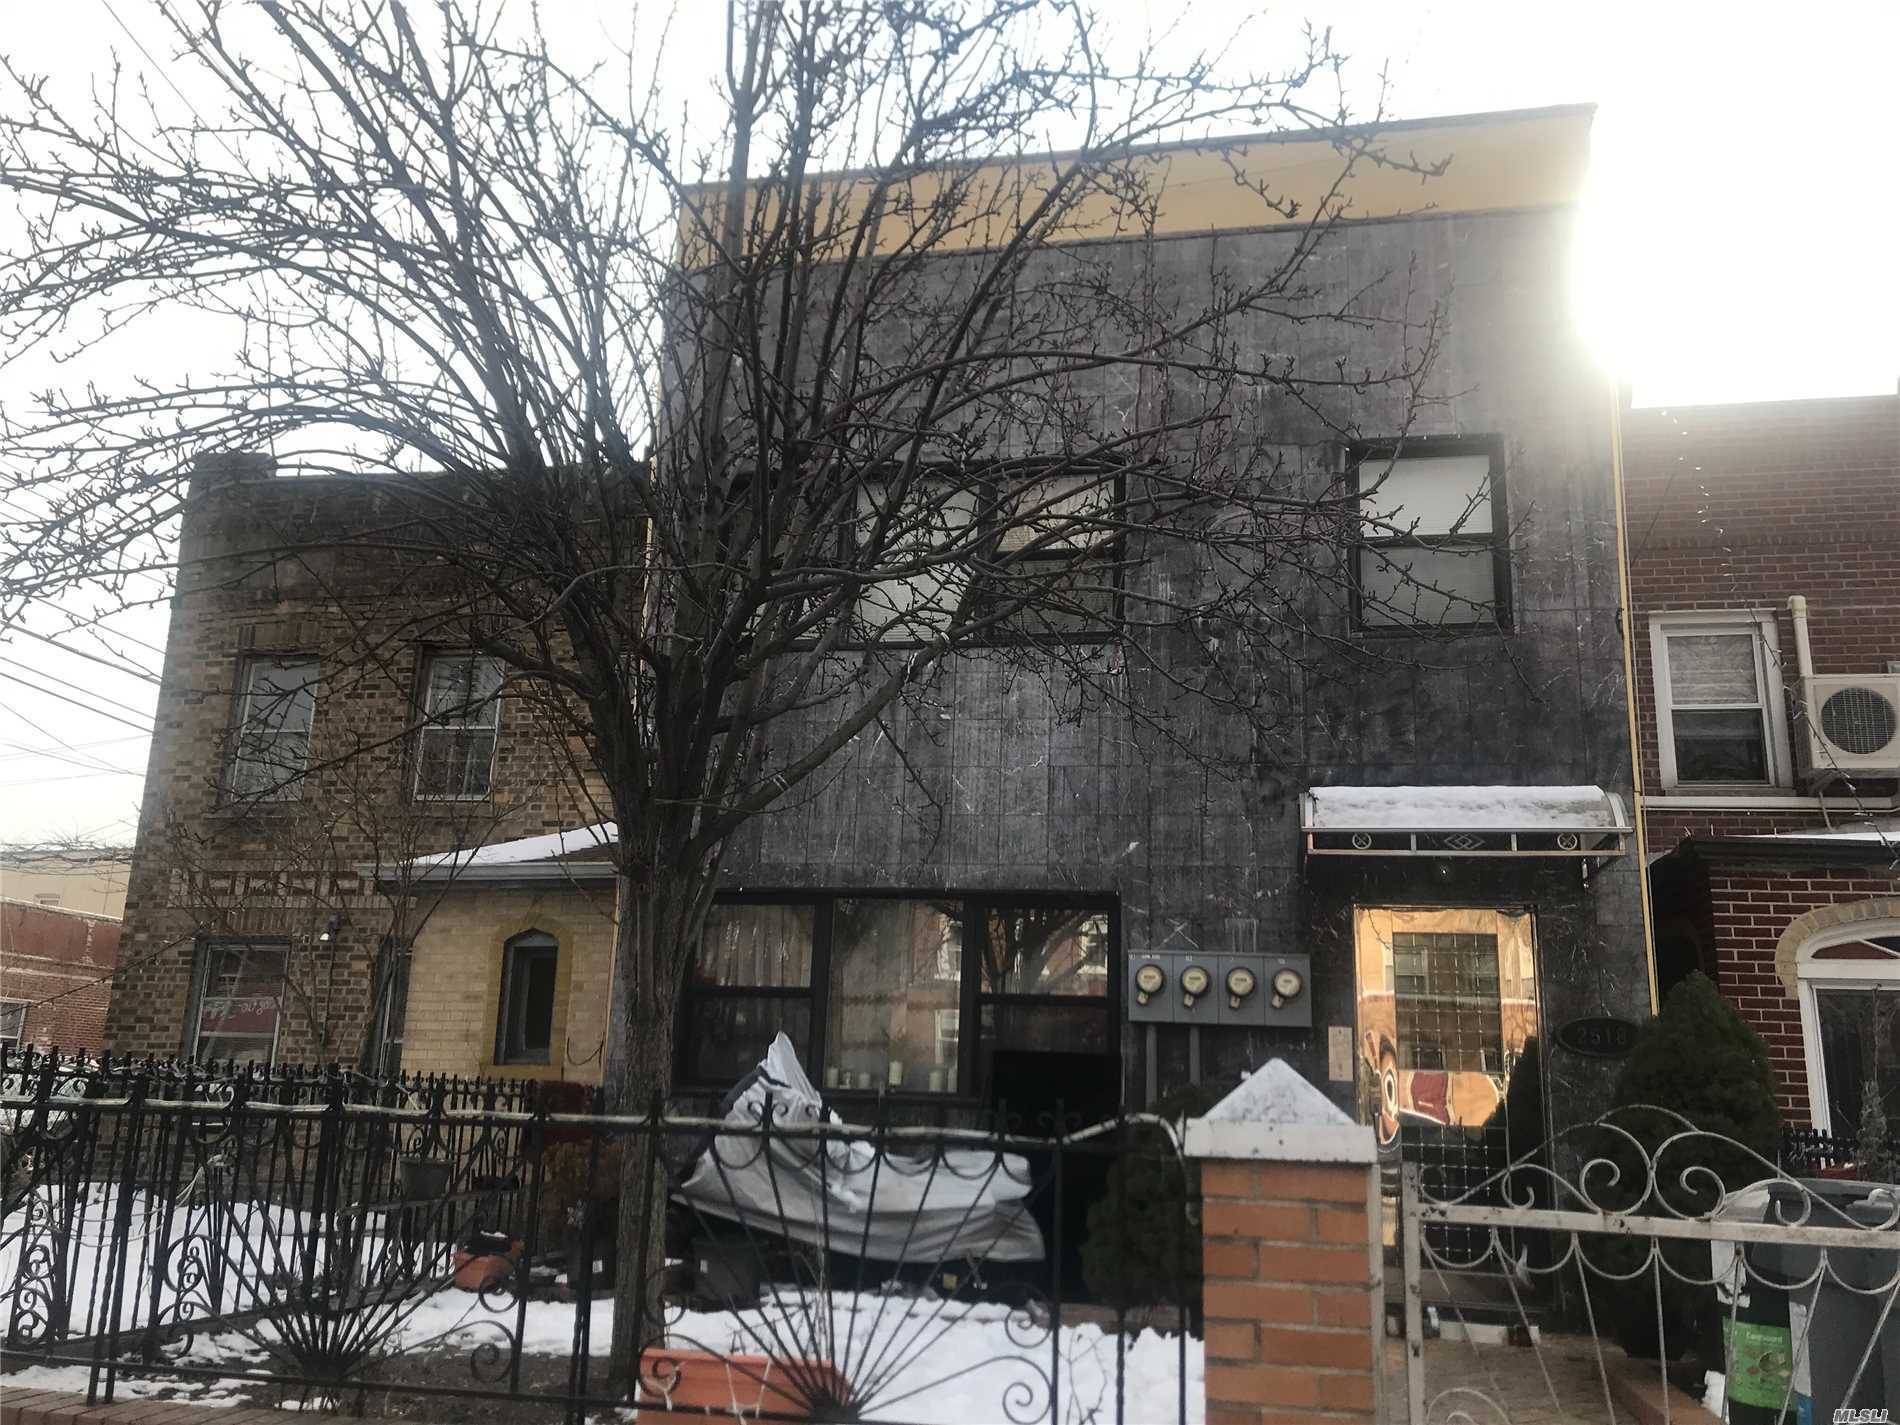 Easy Access For Showing Brick 3 Family Home Extended Updated 2008 Just few minutes From Ditmars Subway Station Close To Markets, Restaurants, Coffee Shops many many more.